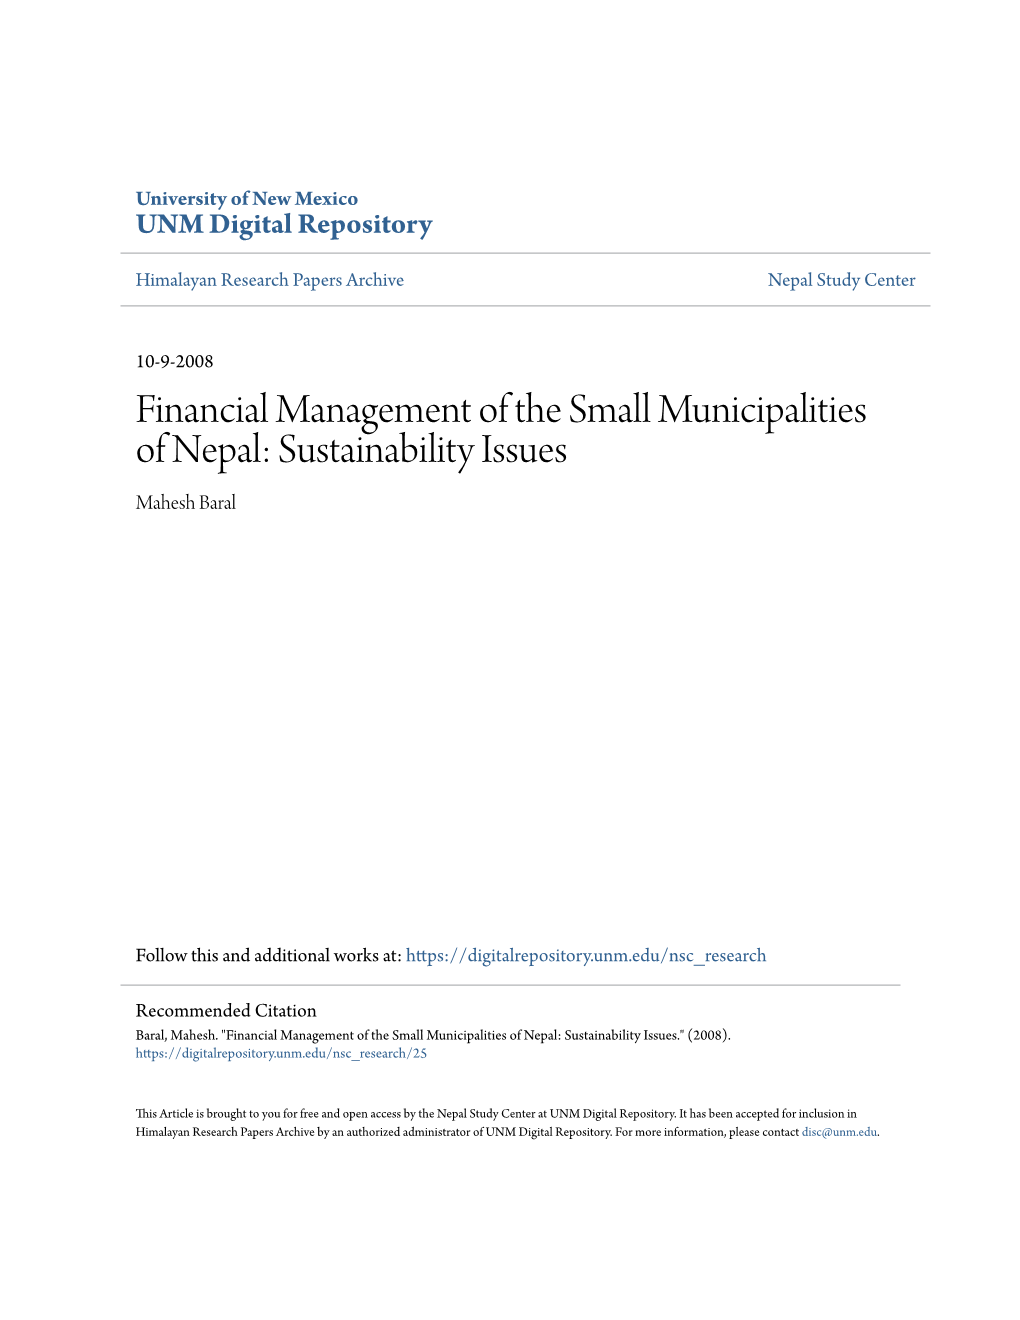 Financial Management of the Small Municipalities of Nepal: Sustainability Issues Mahesh Baral